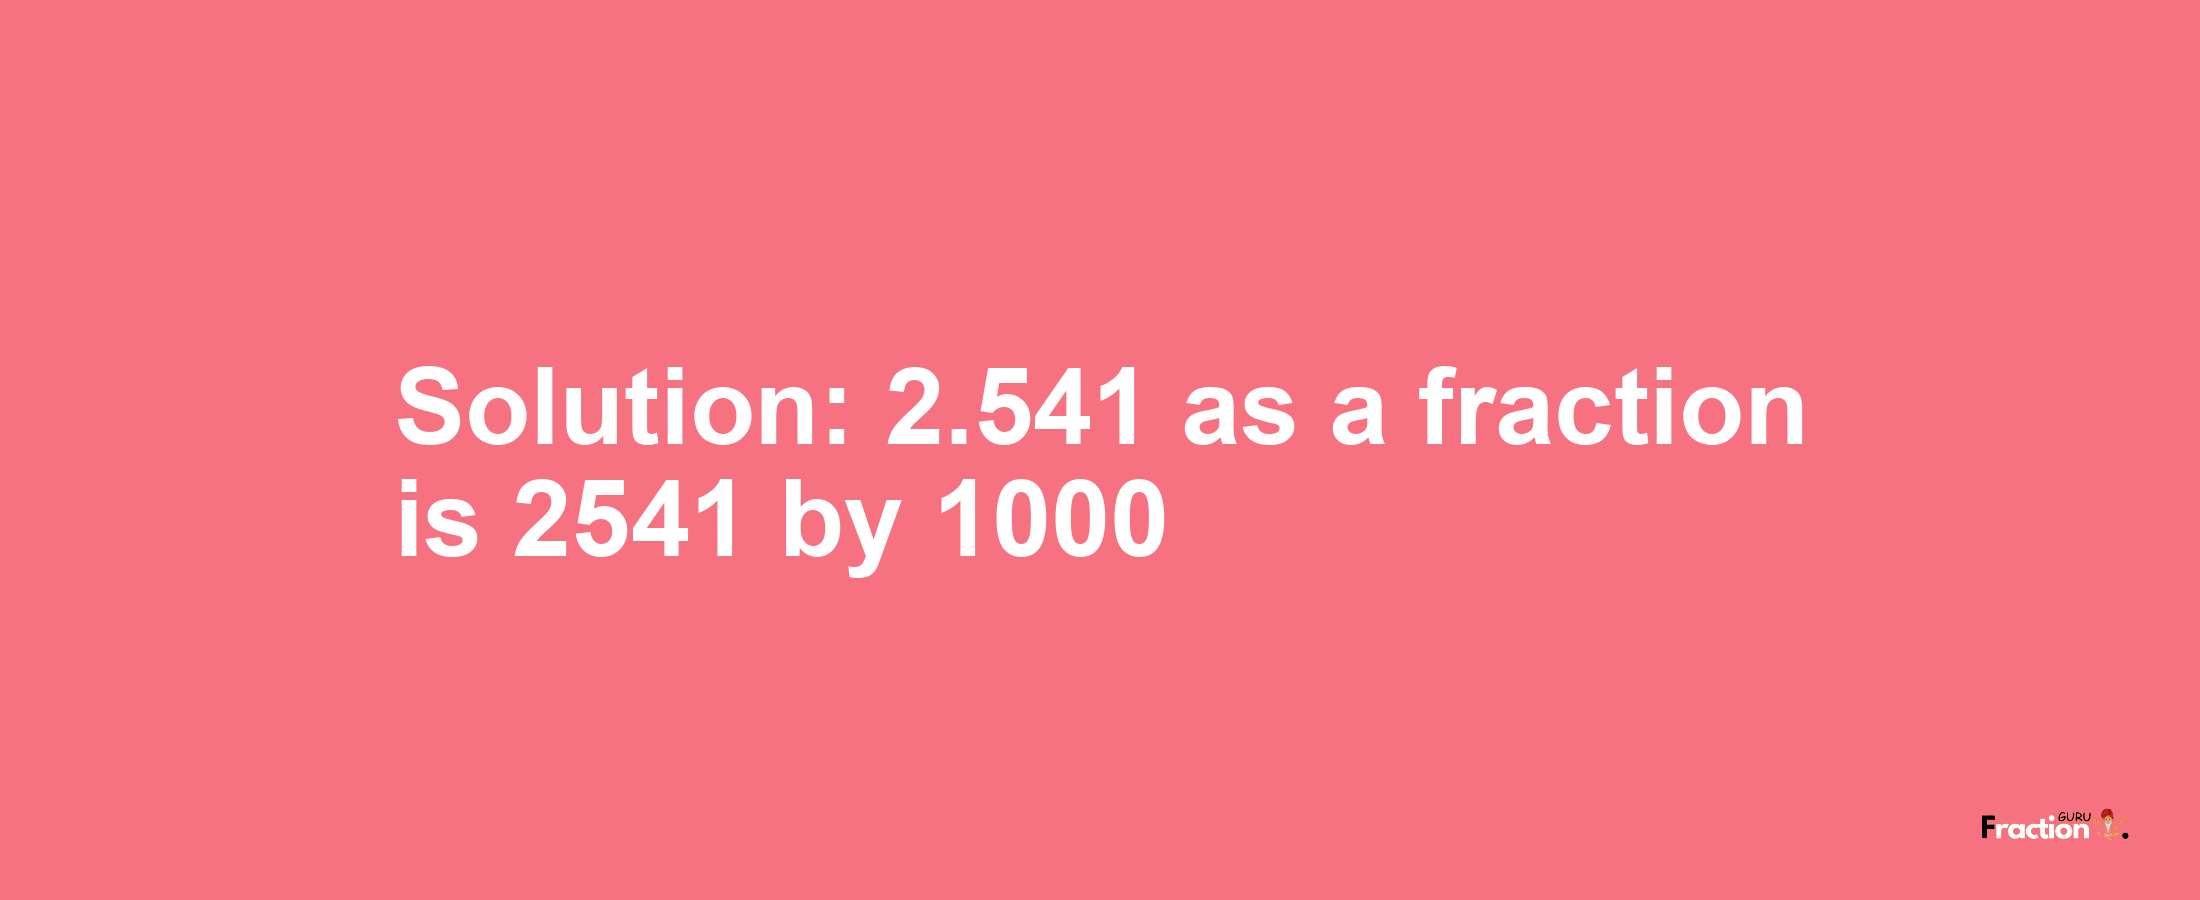 Solution:2.541 as a fraction is 2541/1000